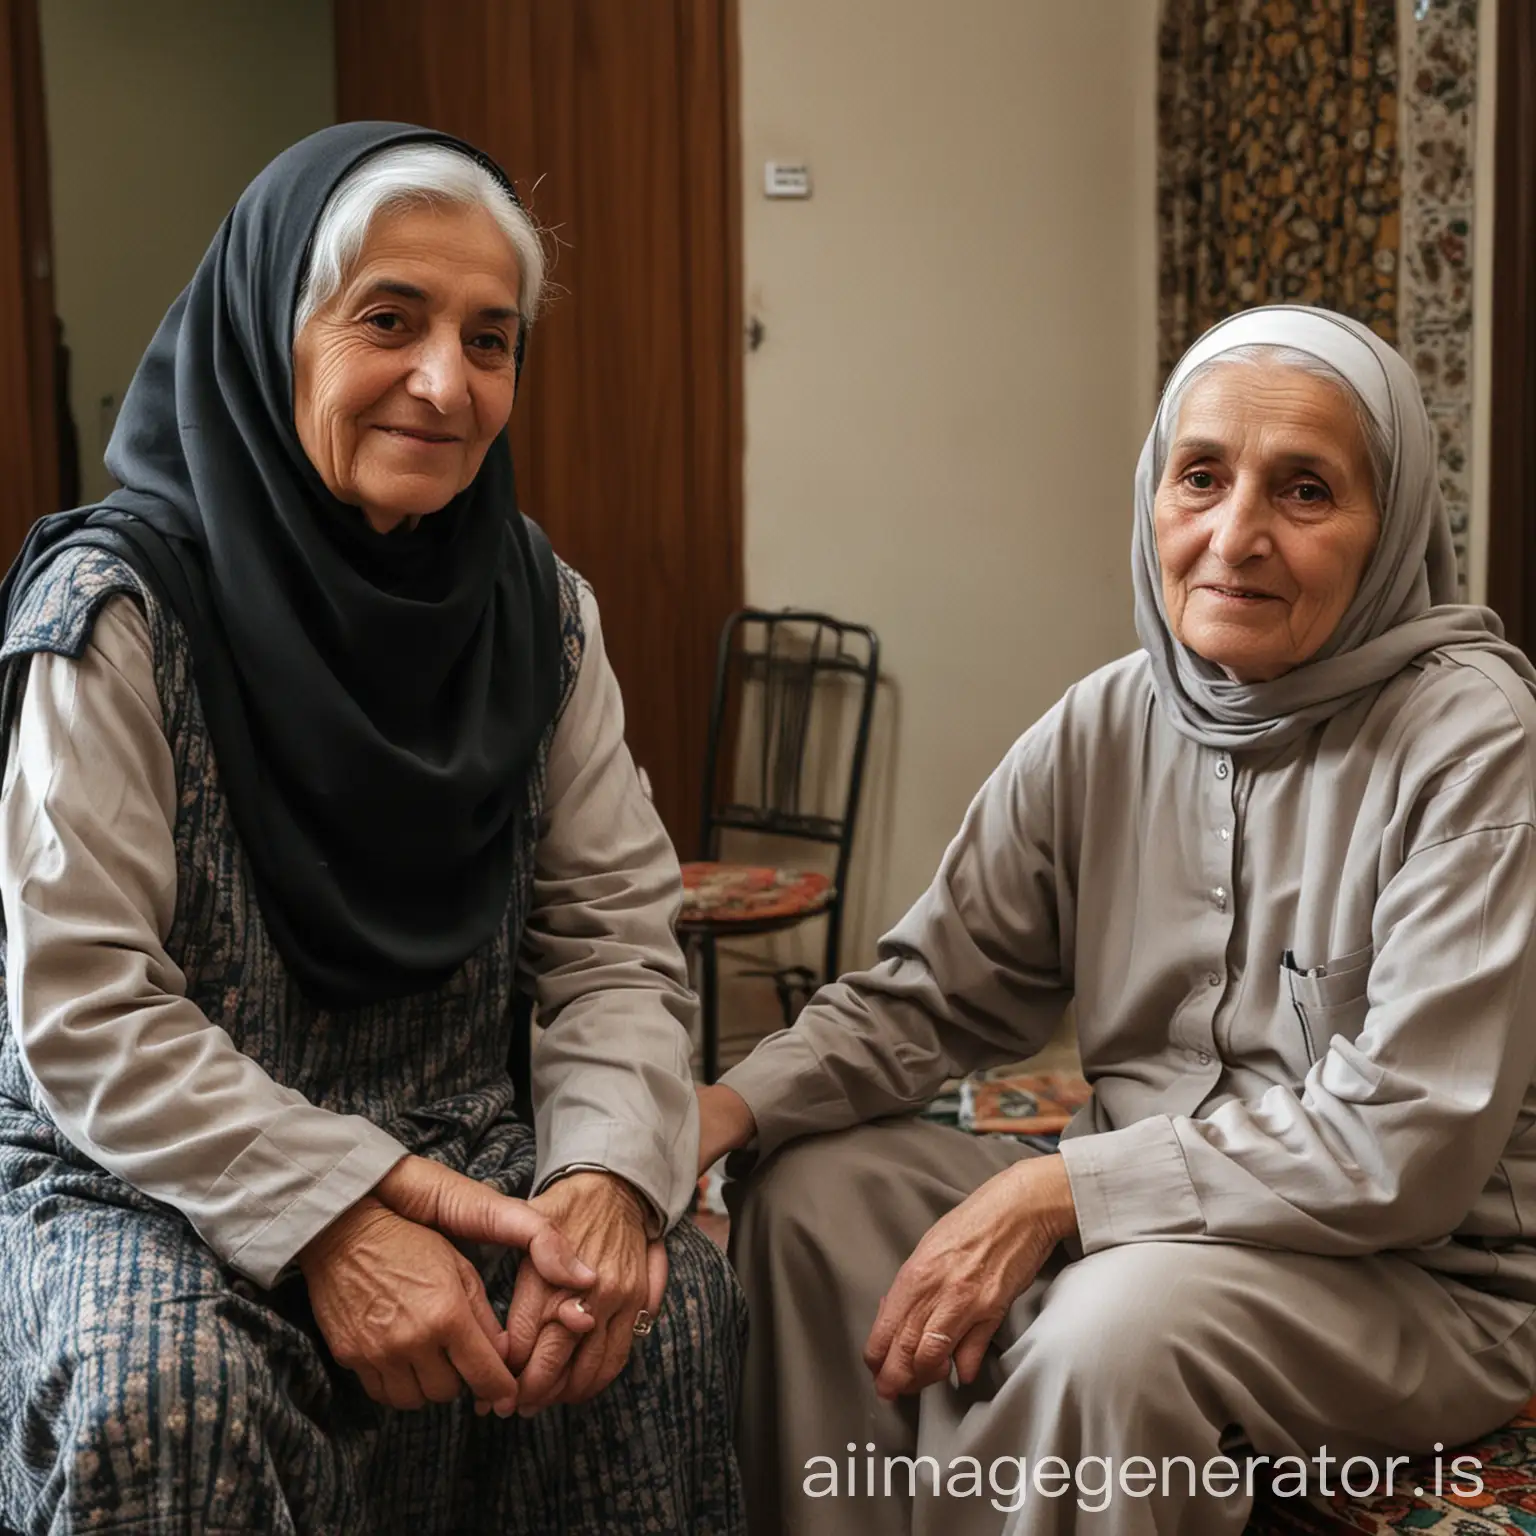 photo of a caretaker next to an Iranian elderly woman that he takes care of in her house